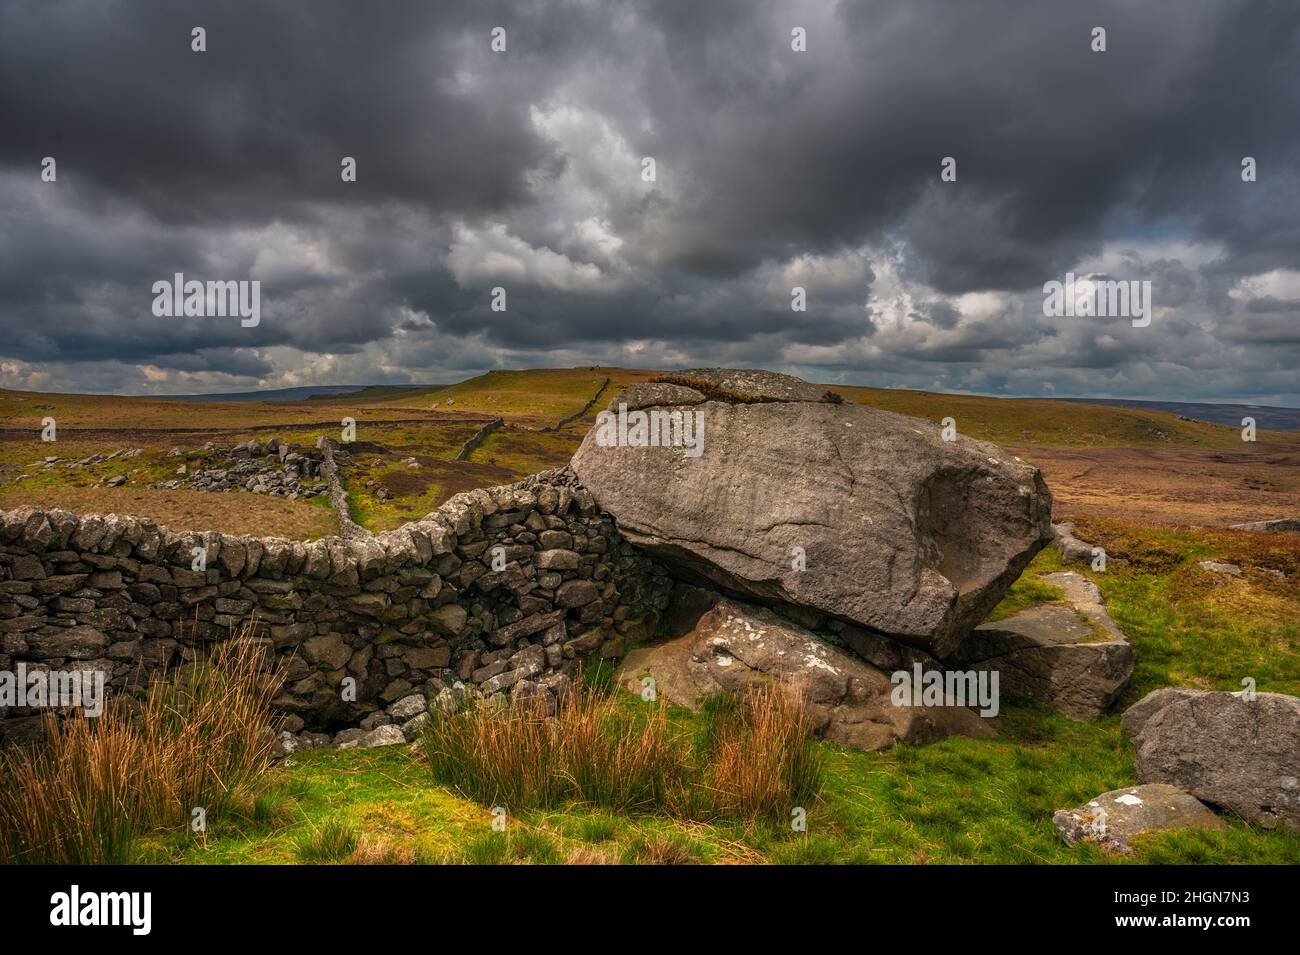 A balanced boulder at Knotteranum near Bowland Knotts in the Forest of Bowland, Lancashire Stock Photo